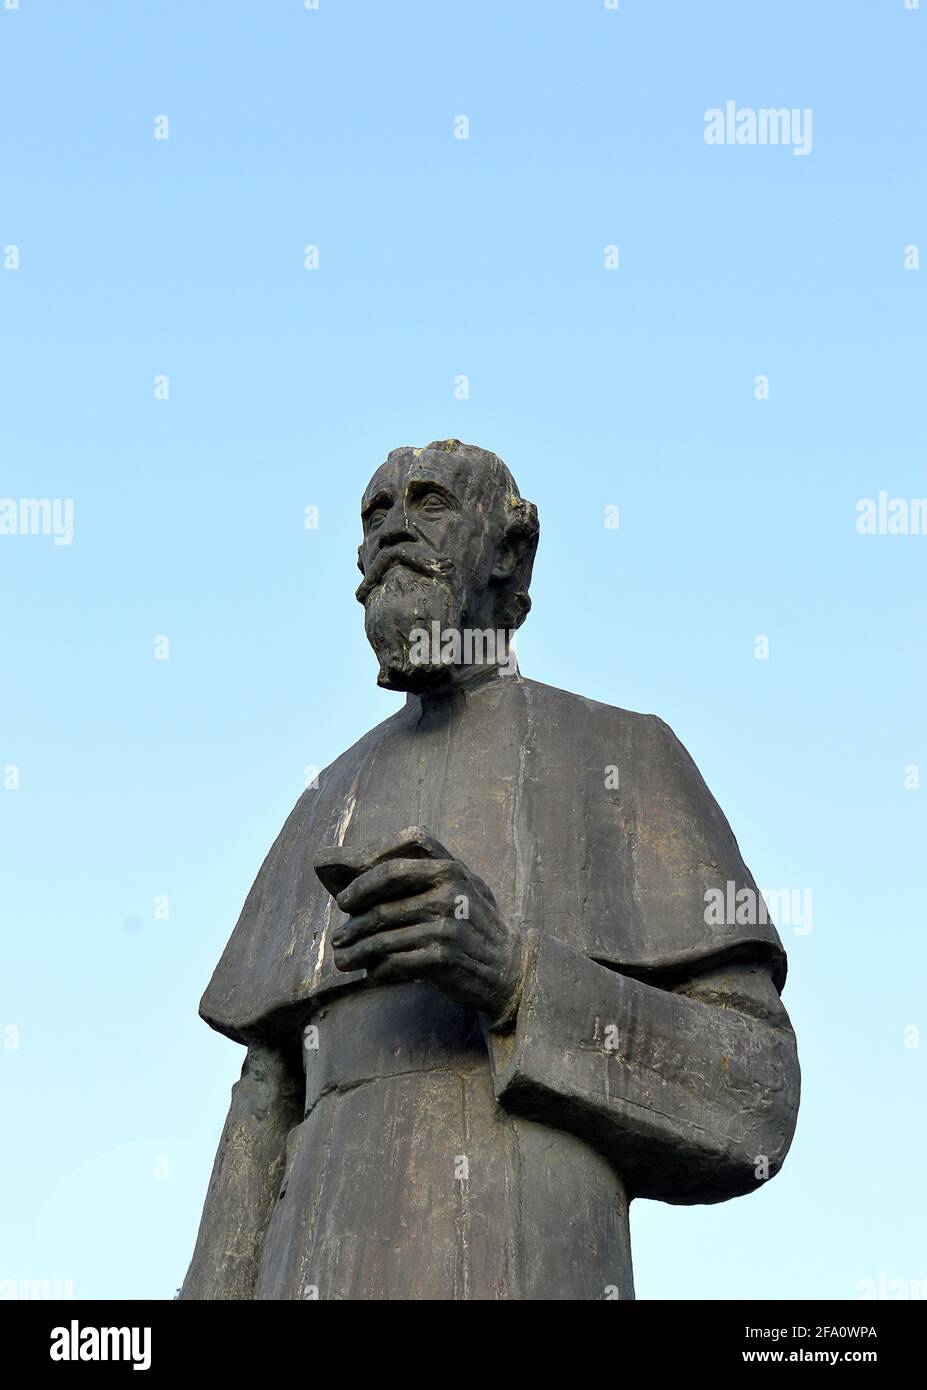 BUCHAREST, ROMANIA - 26 FEBRUARY 2021: Statue of Monsignor Vladimir Ghika, Roman Catholic priest, founder of Romania's first free hospital and first a Stock Photo